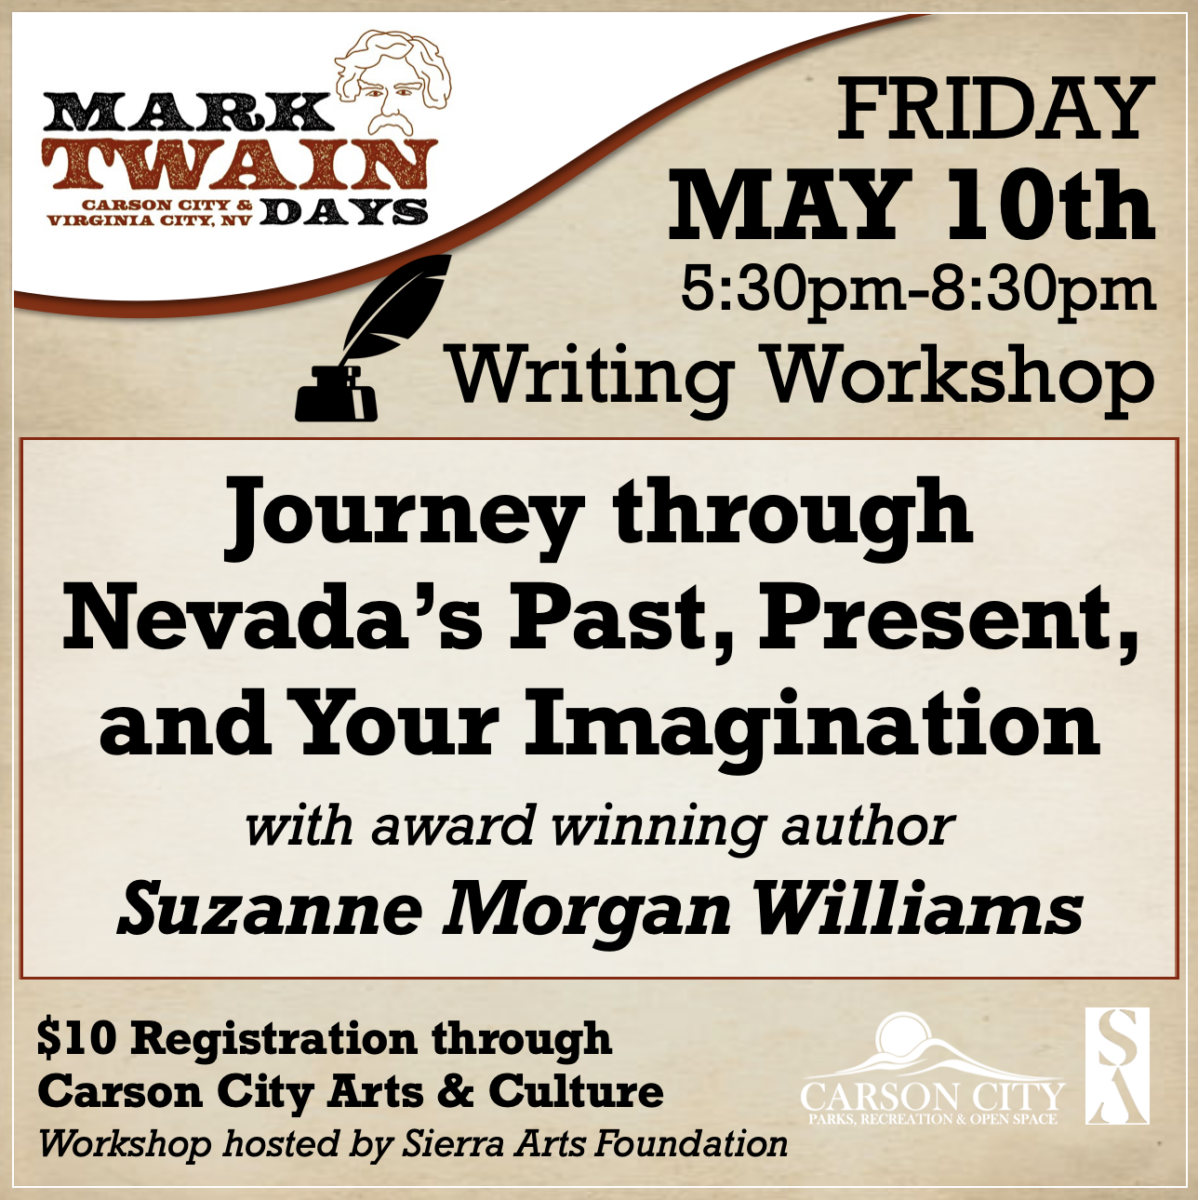 Journey through Nevada's Past, Present, and Your Imagination